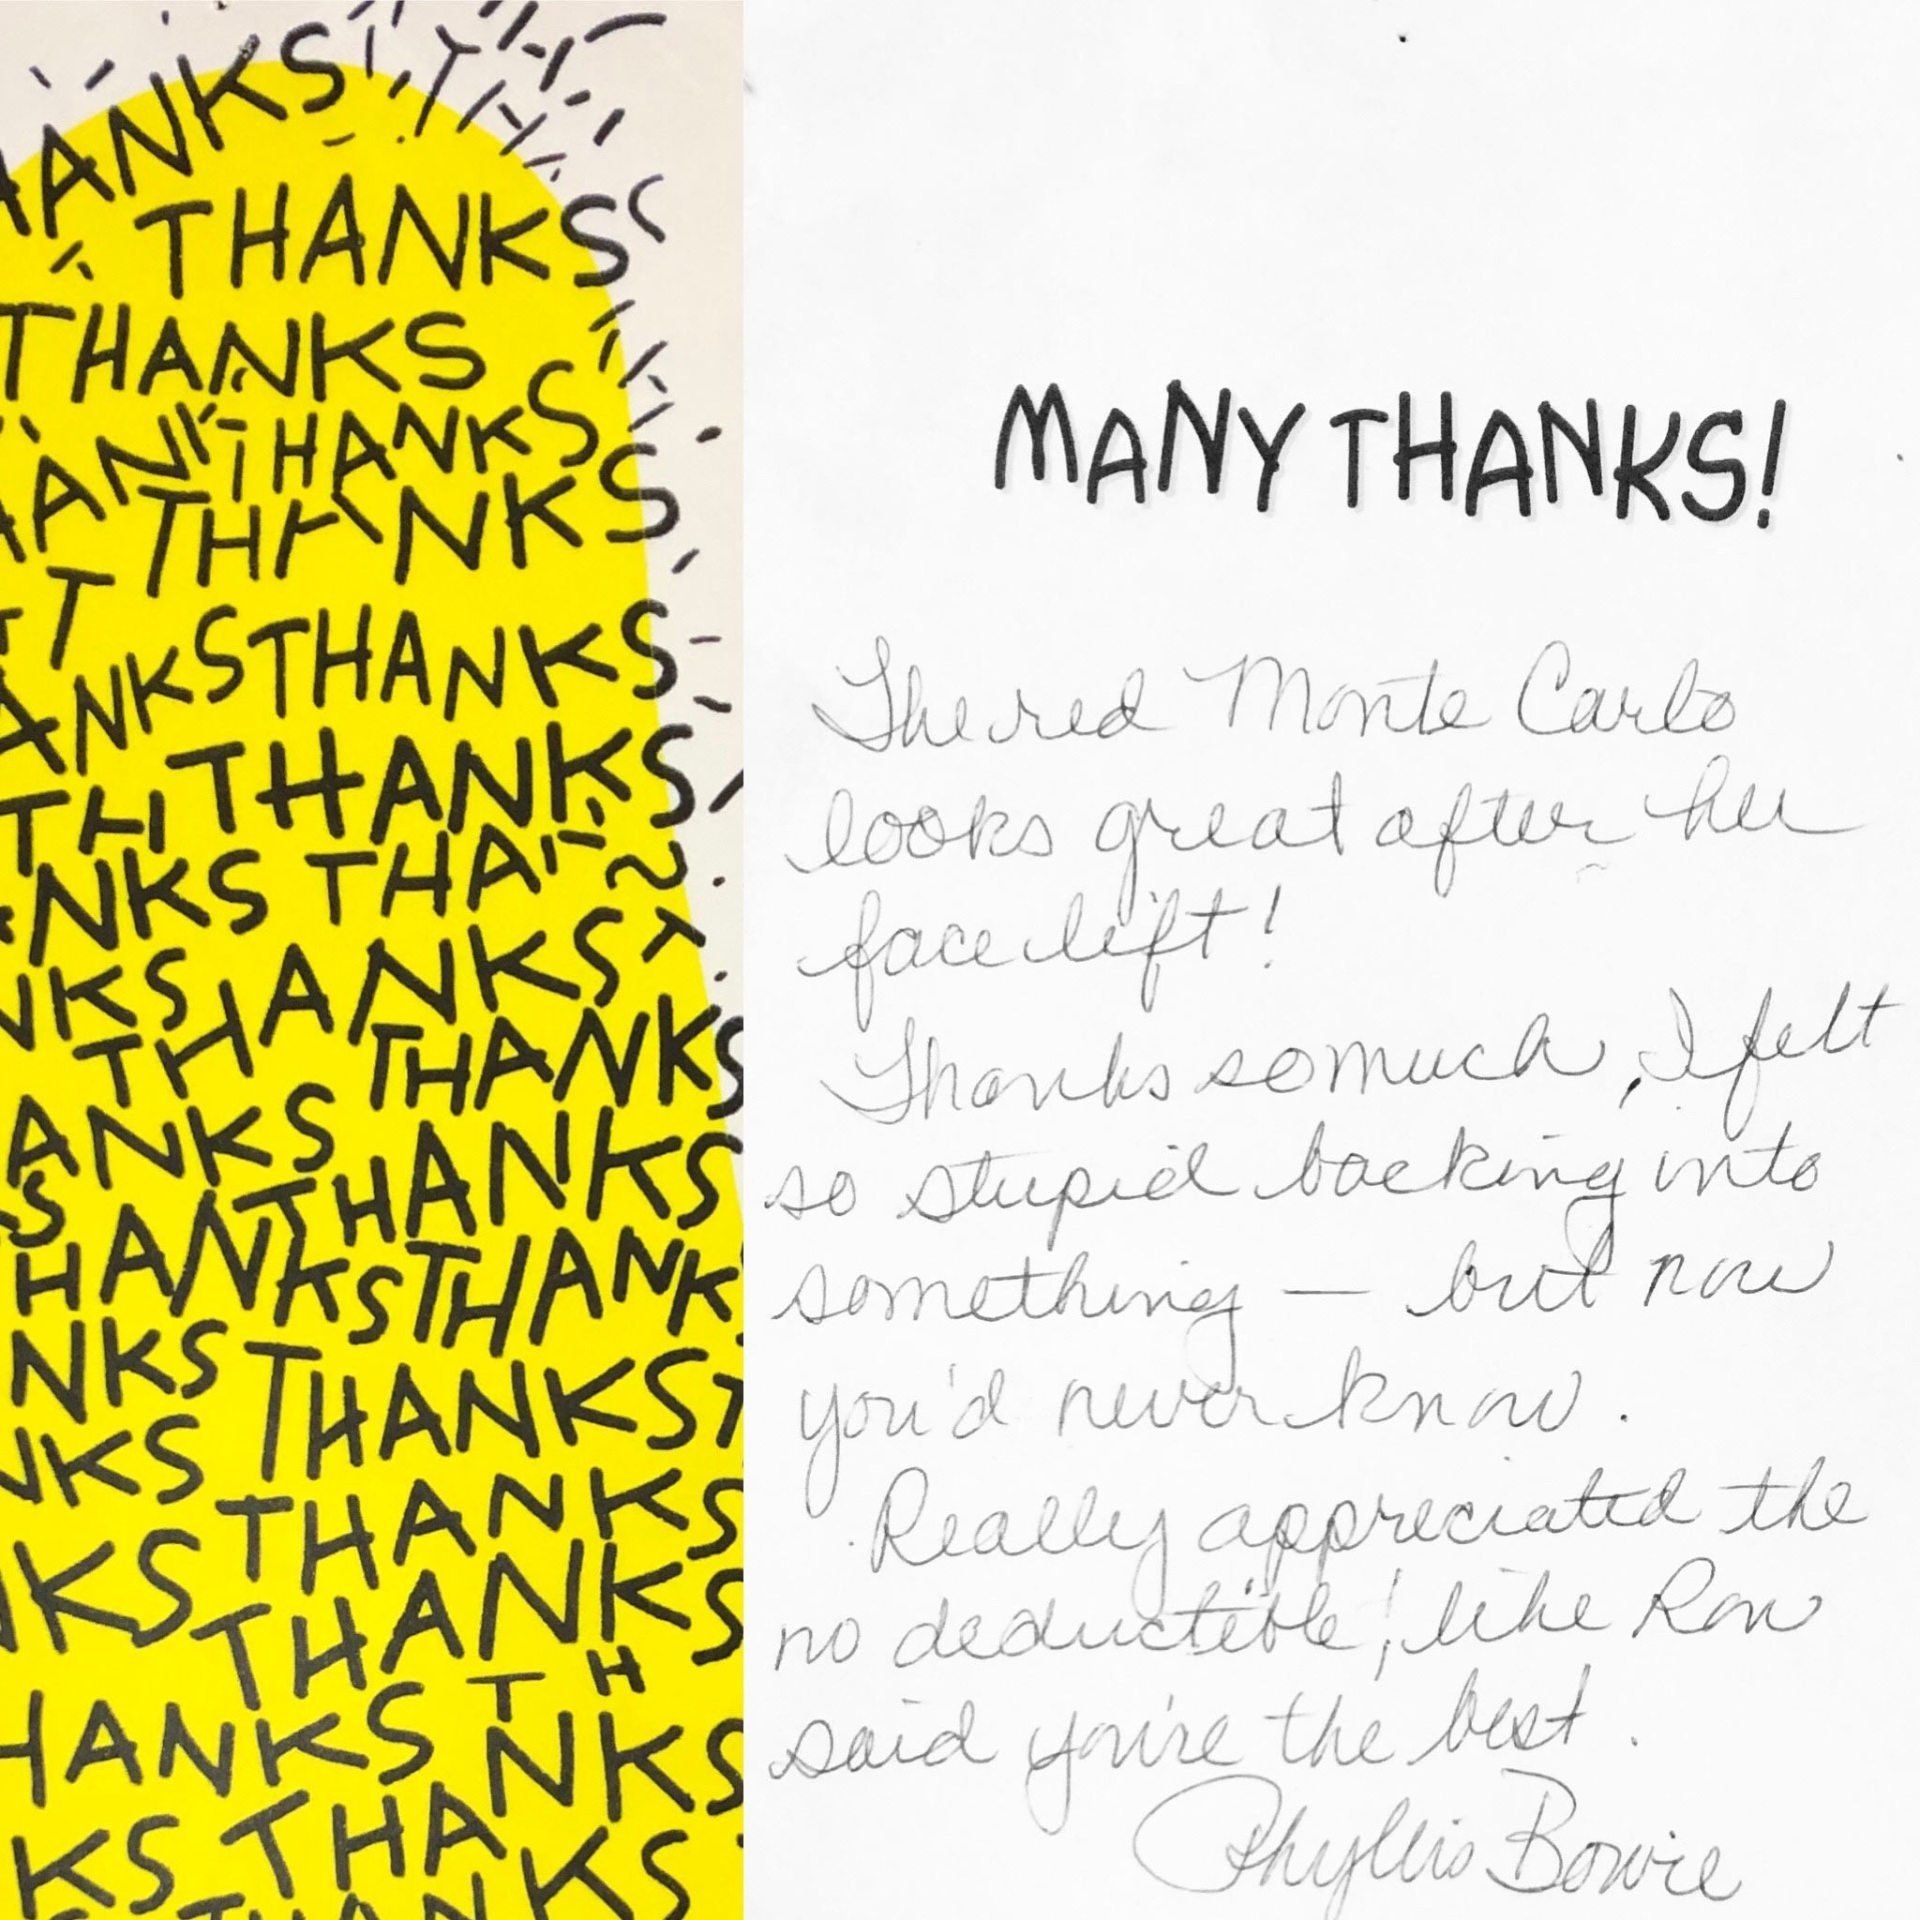 Thankful Letter of Customer — Oxford, OH — Stateline Auto Body